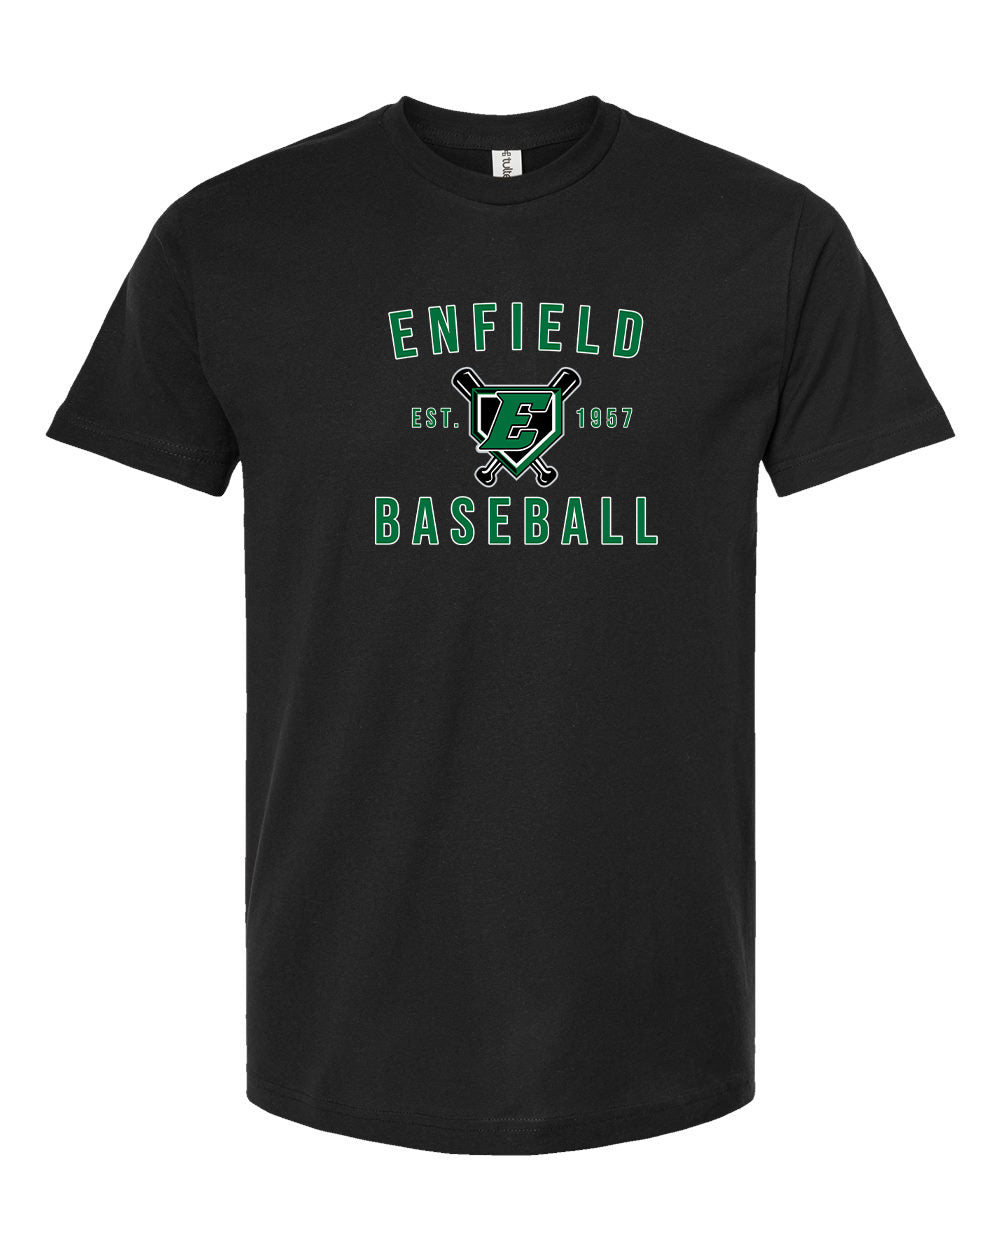 ELL Adult Jersey T-shirt "EST" - 202 (color options available)